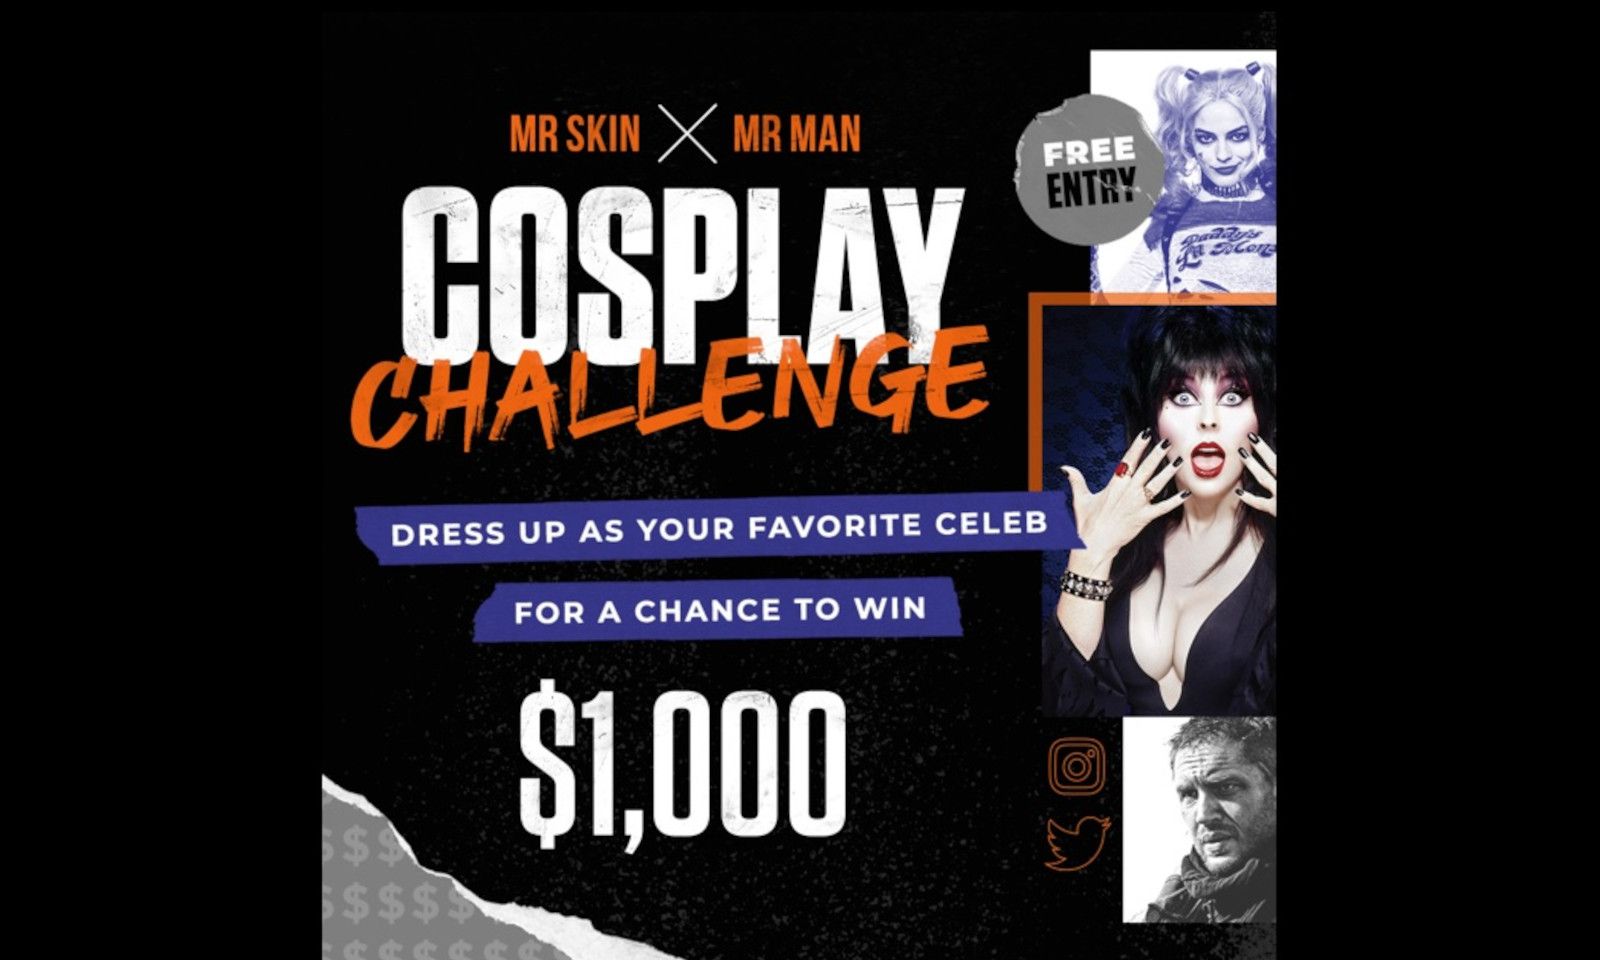 Mr. Skin/Mr. Man Select Finalists for Cosplay Challenge